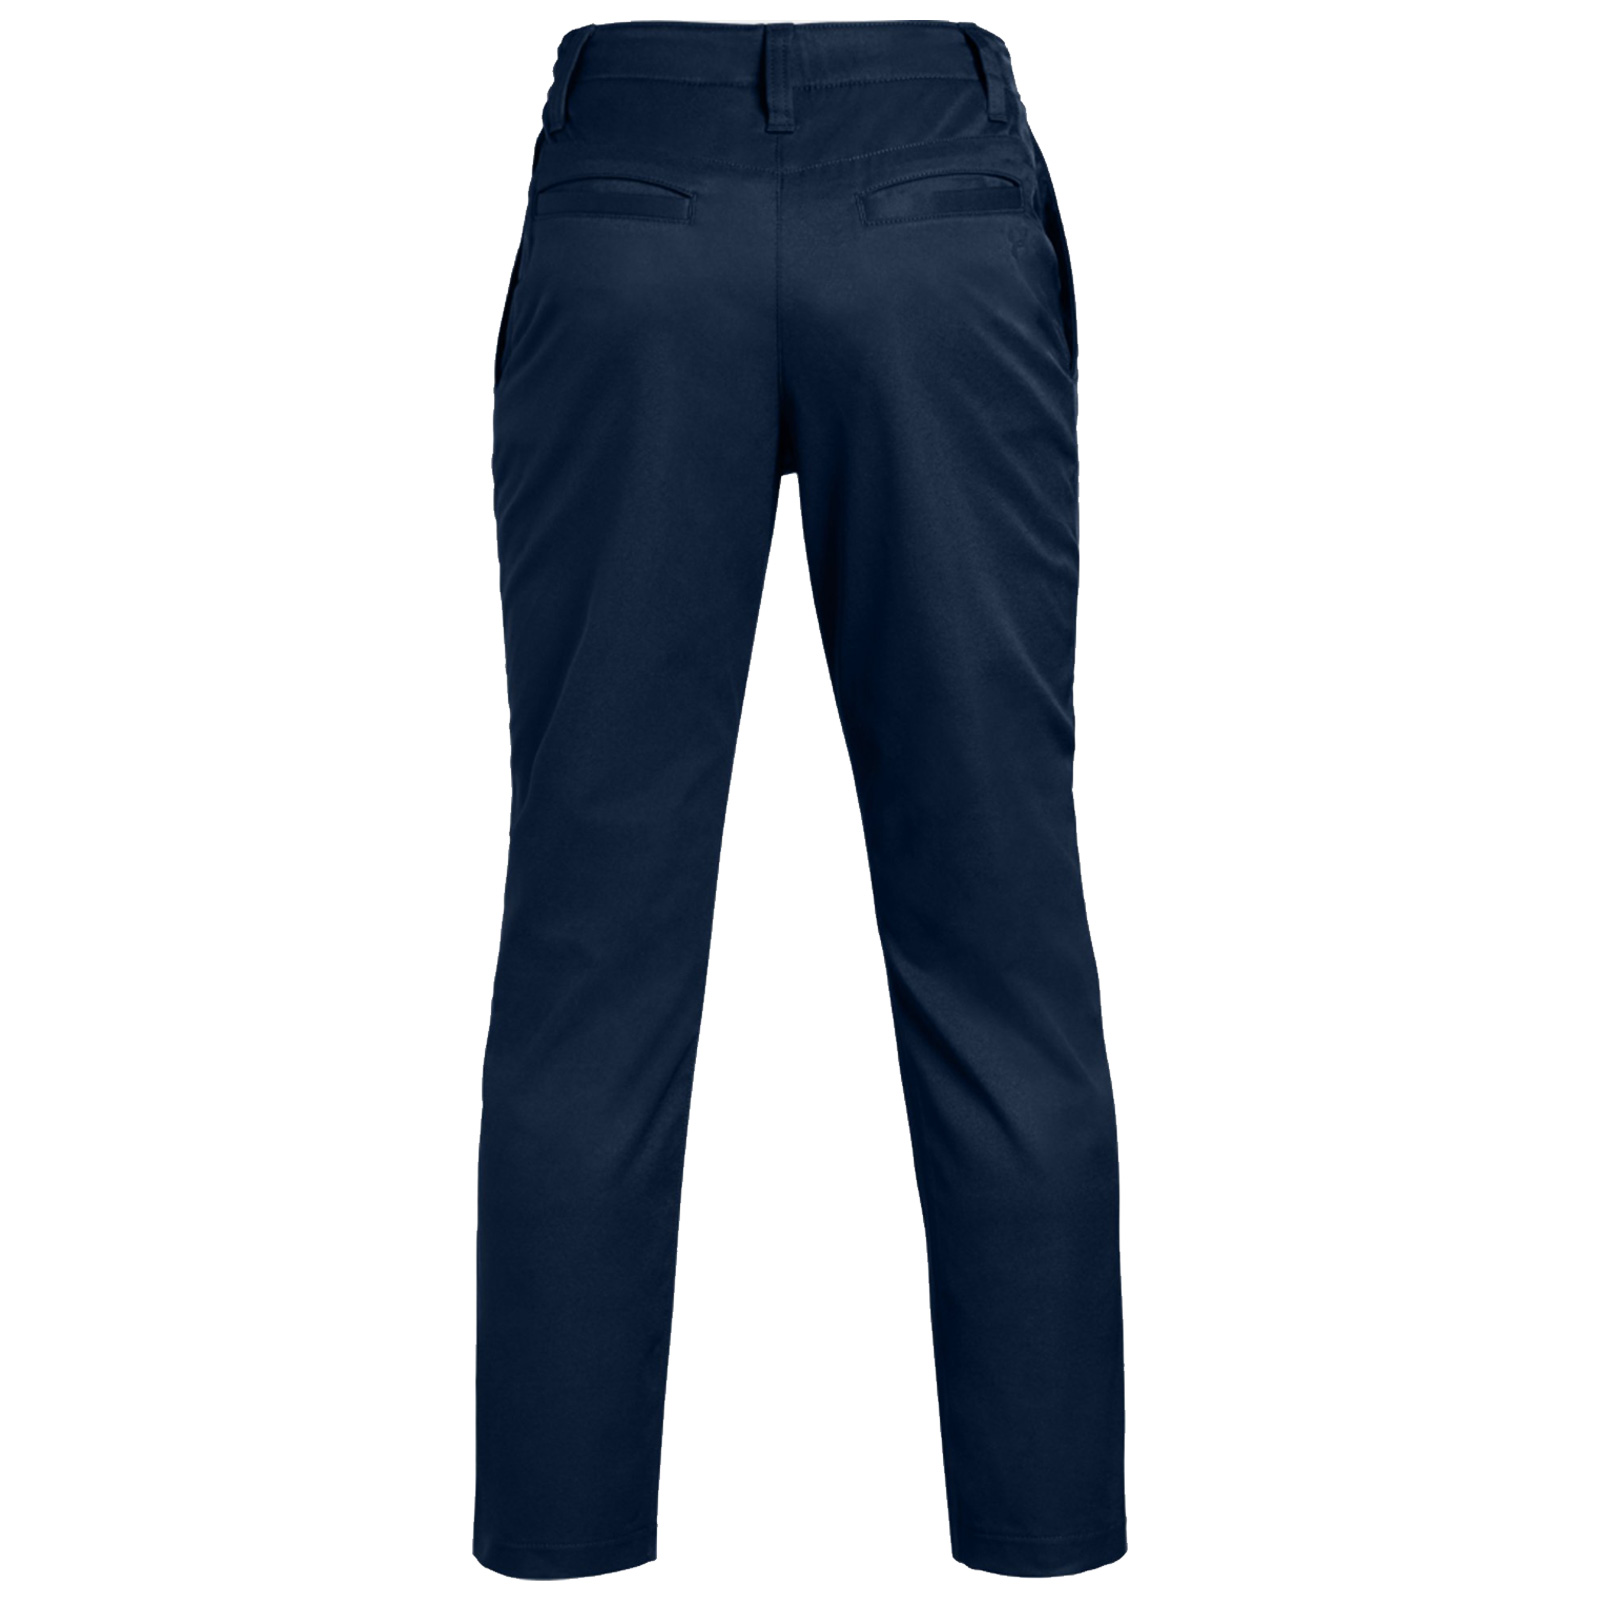 Under Armour Boys Match Play Taper Pants